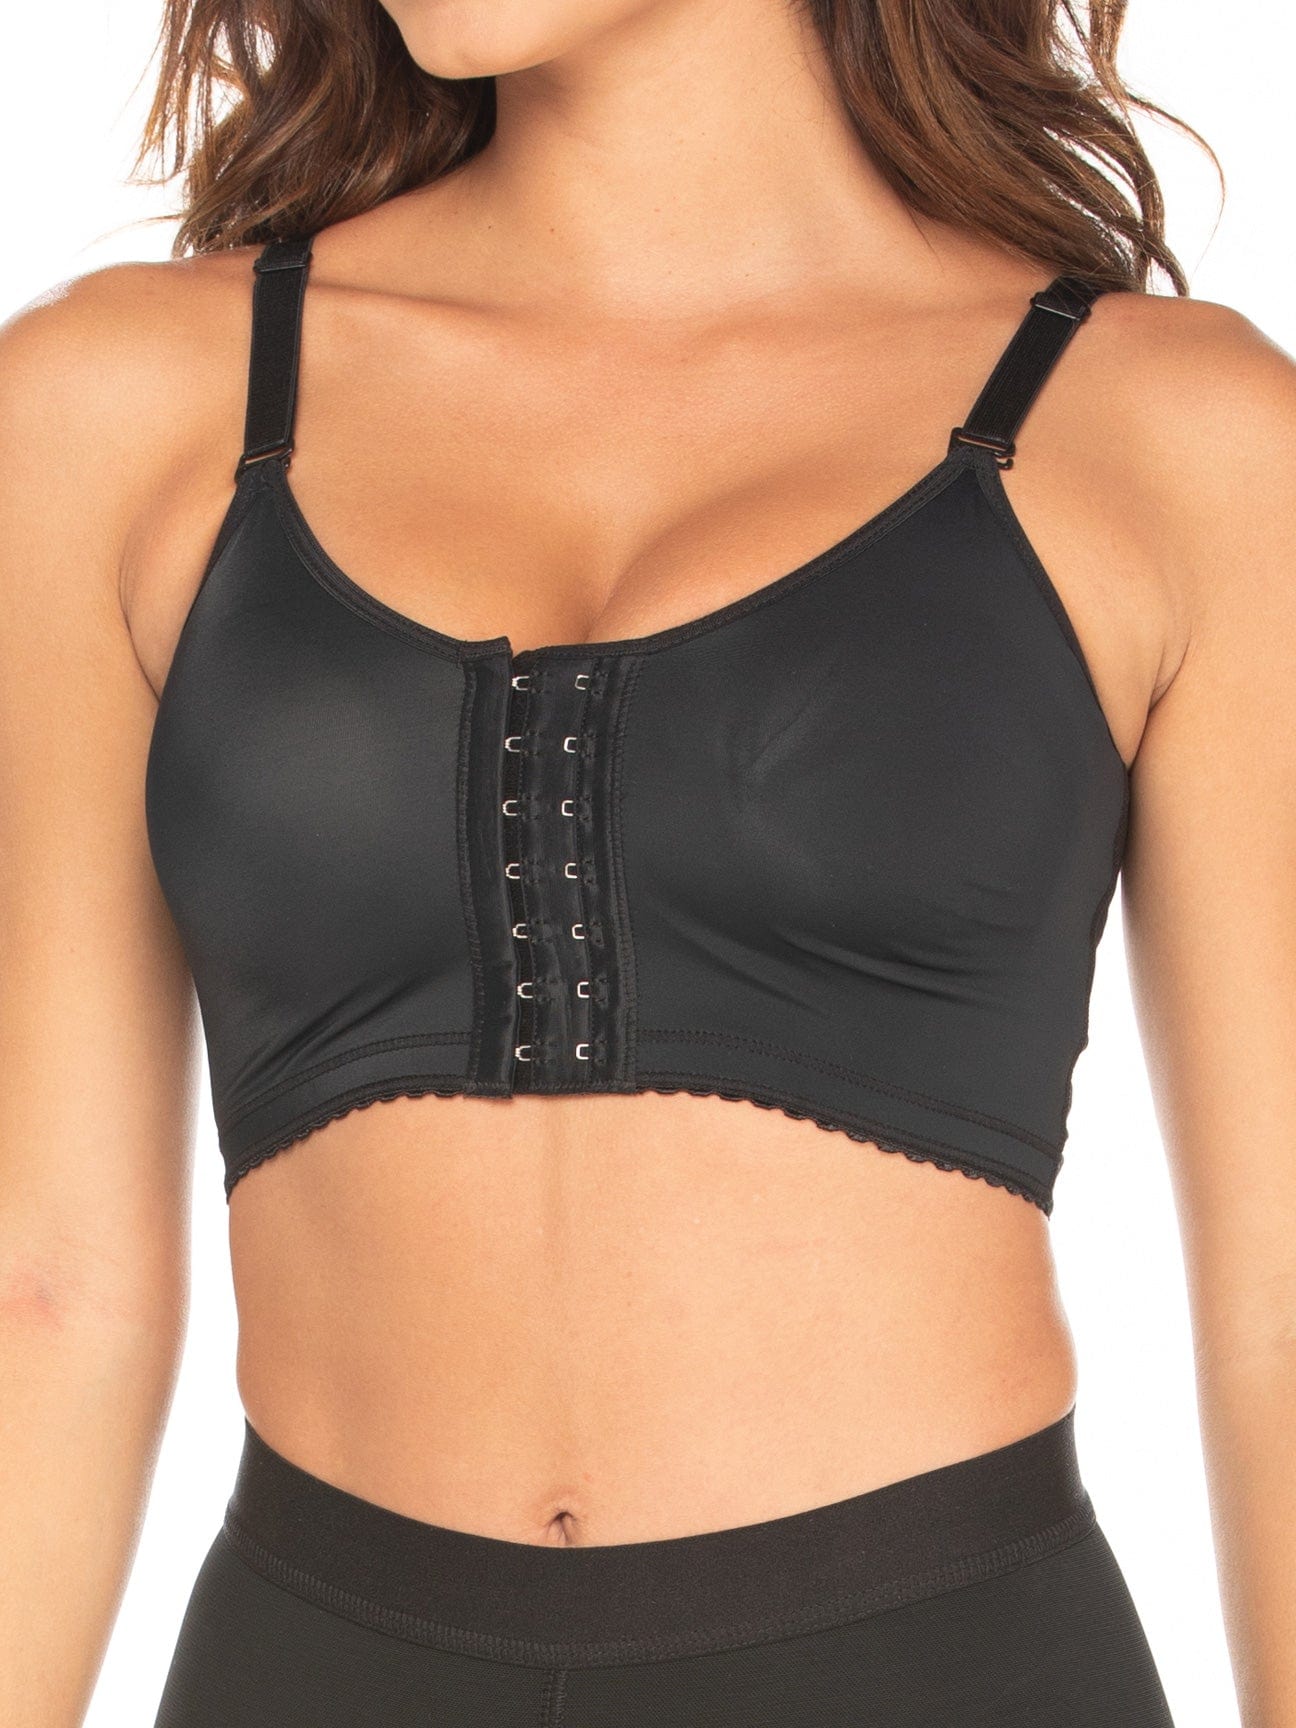 Closer look at the central hooks of the black high compression surgical bra.